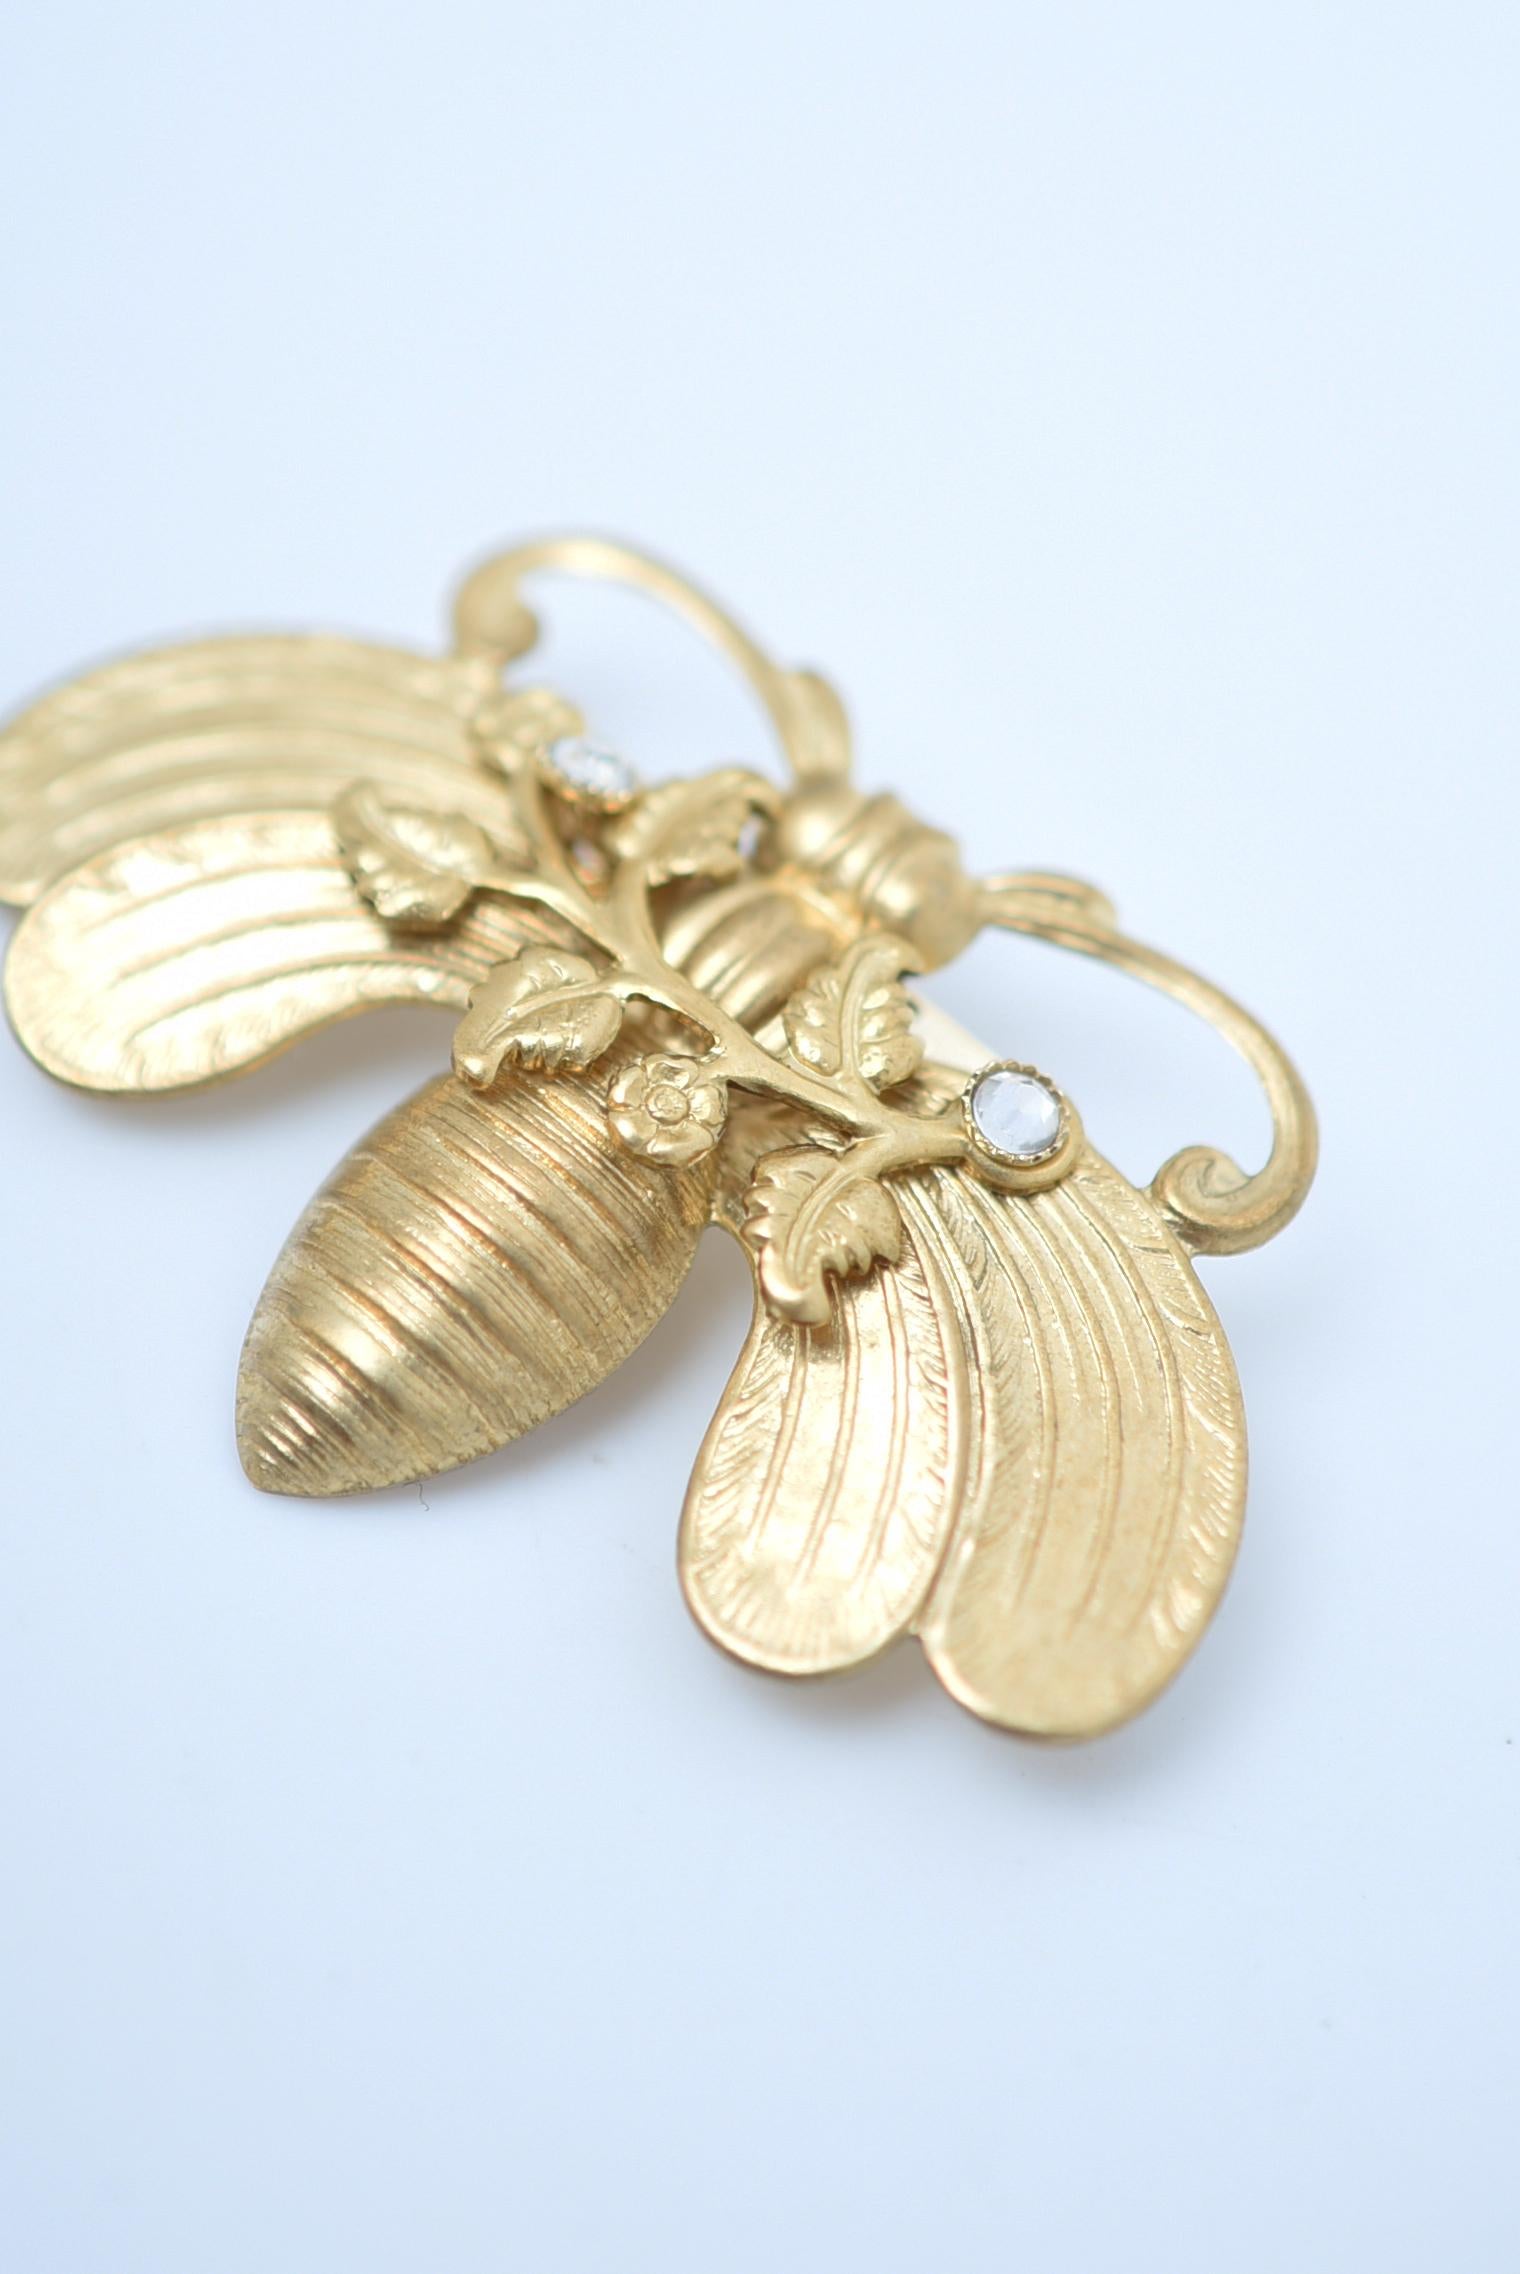 material:brass, swarovski glass
size:wide 3.8cm

This cute bee brooch has a rounded silhouette.
The design has no corners, so there is no discomfort when it touches the skin, which is characteristic of brooches.
It is sure to brighten up a simple